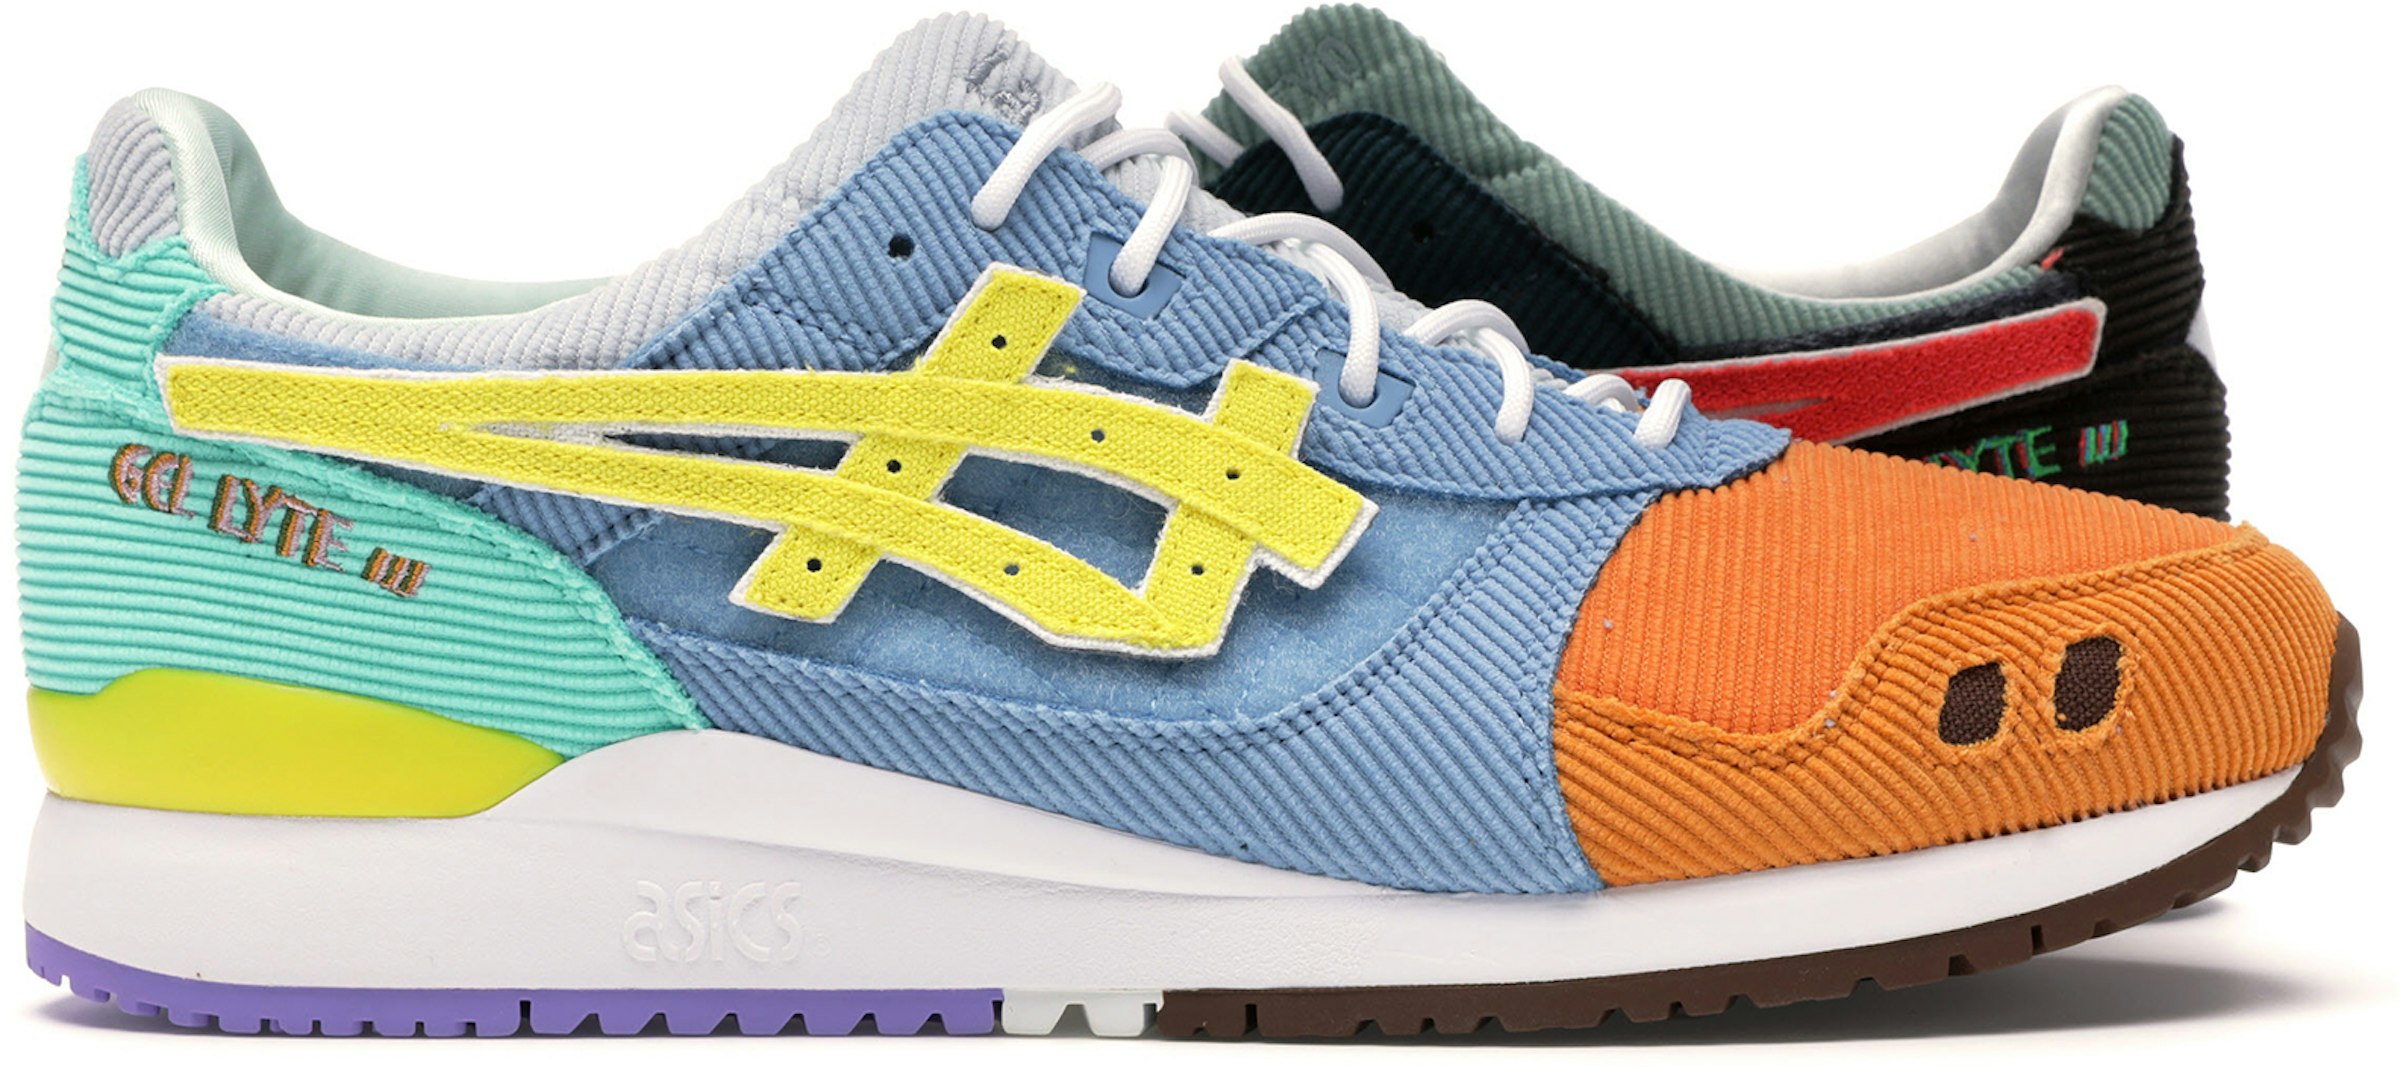 ASICS Gel-Lyte III Wotherspoon x Men's - 1203A019-000 - US